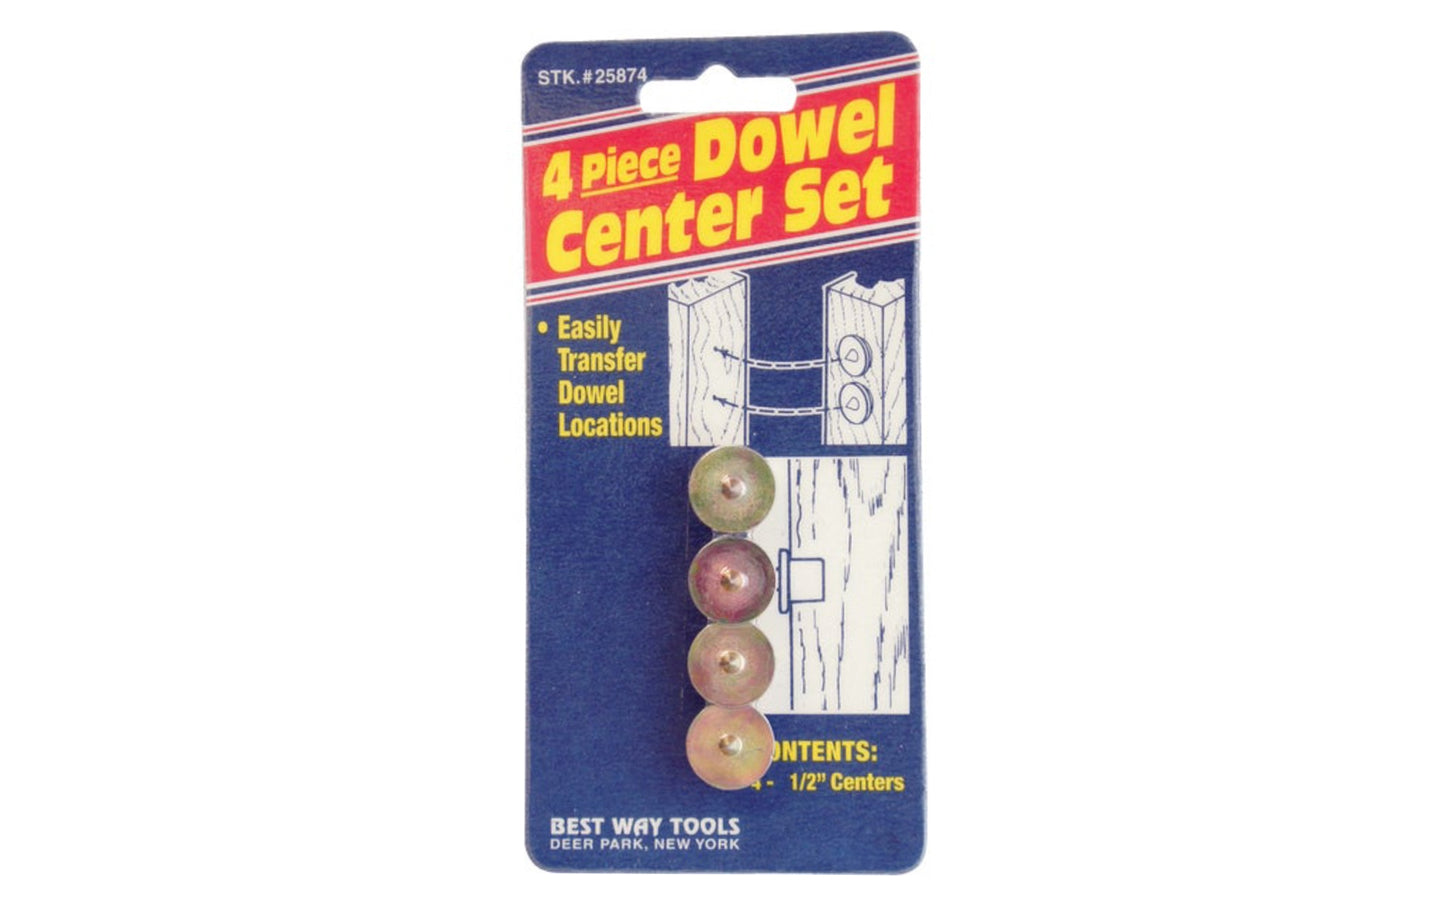 Best Way Tools 1/2" Dowel Centers - 4 PC Set. Makes dowel positioning quick & easy. Accurately marks holes for drilling. Includes 4 centers. Four piece set. Model 25874. 080497258740